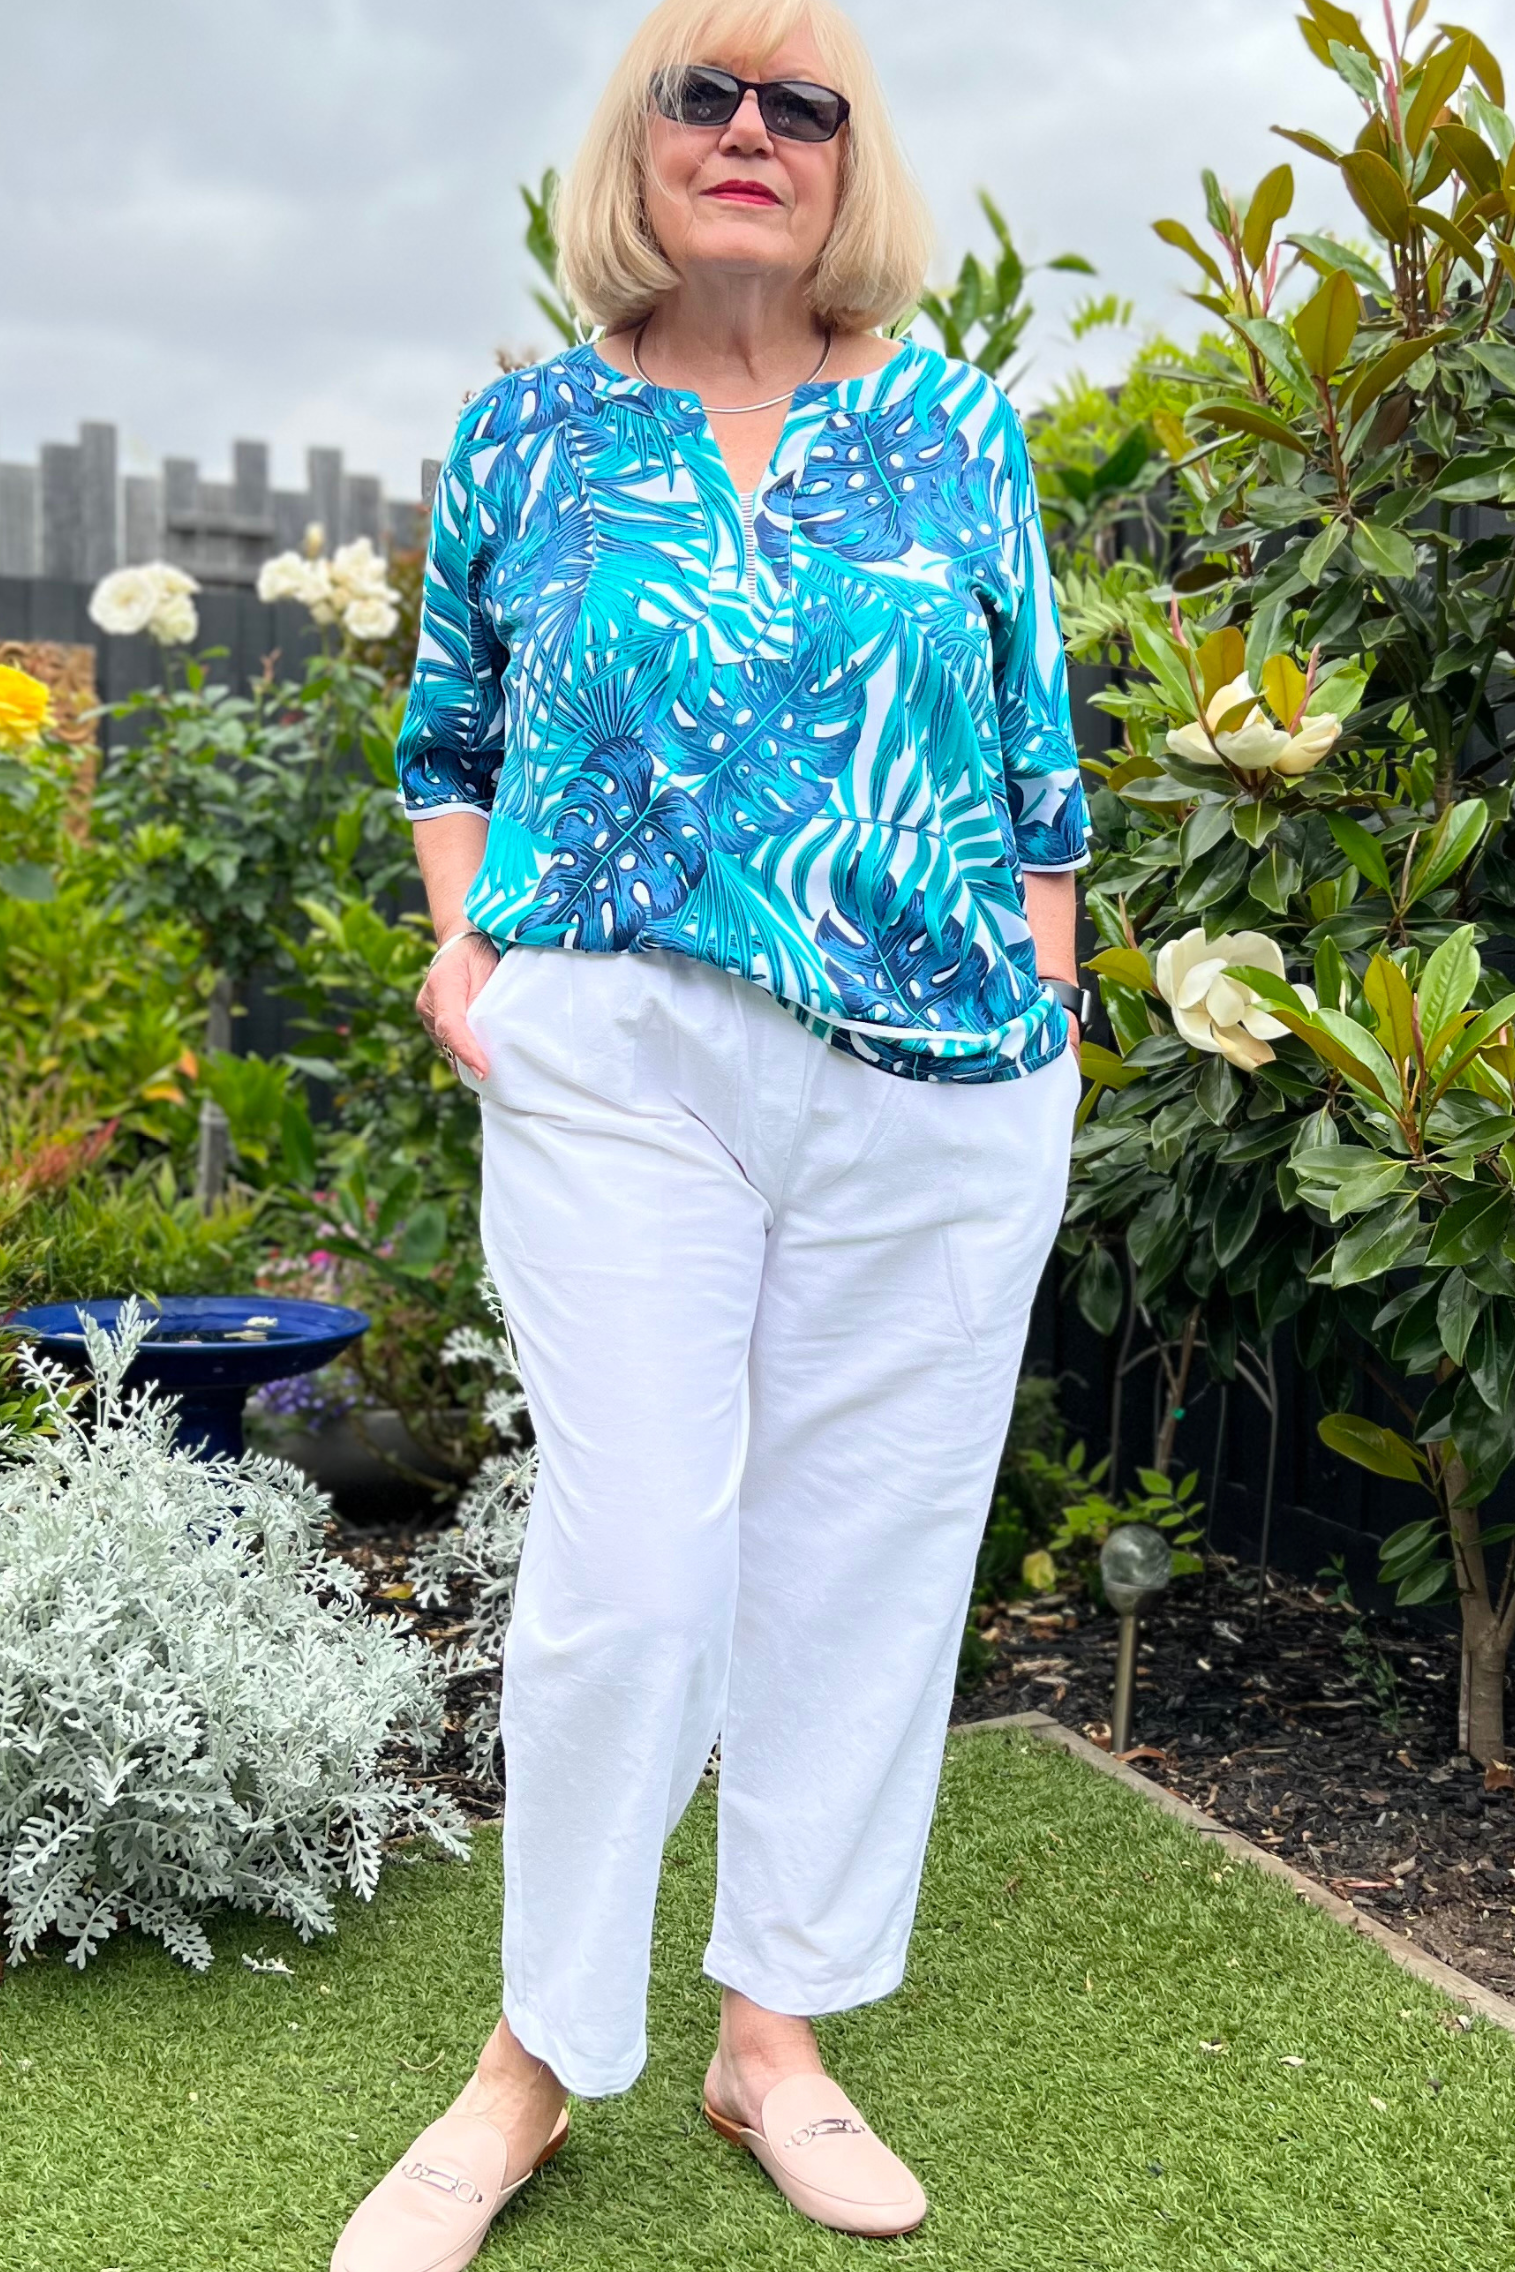 Kita Ku modelling the cotton white Pant Port with a tropical top in a garden setting. 